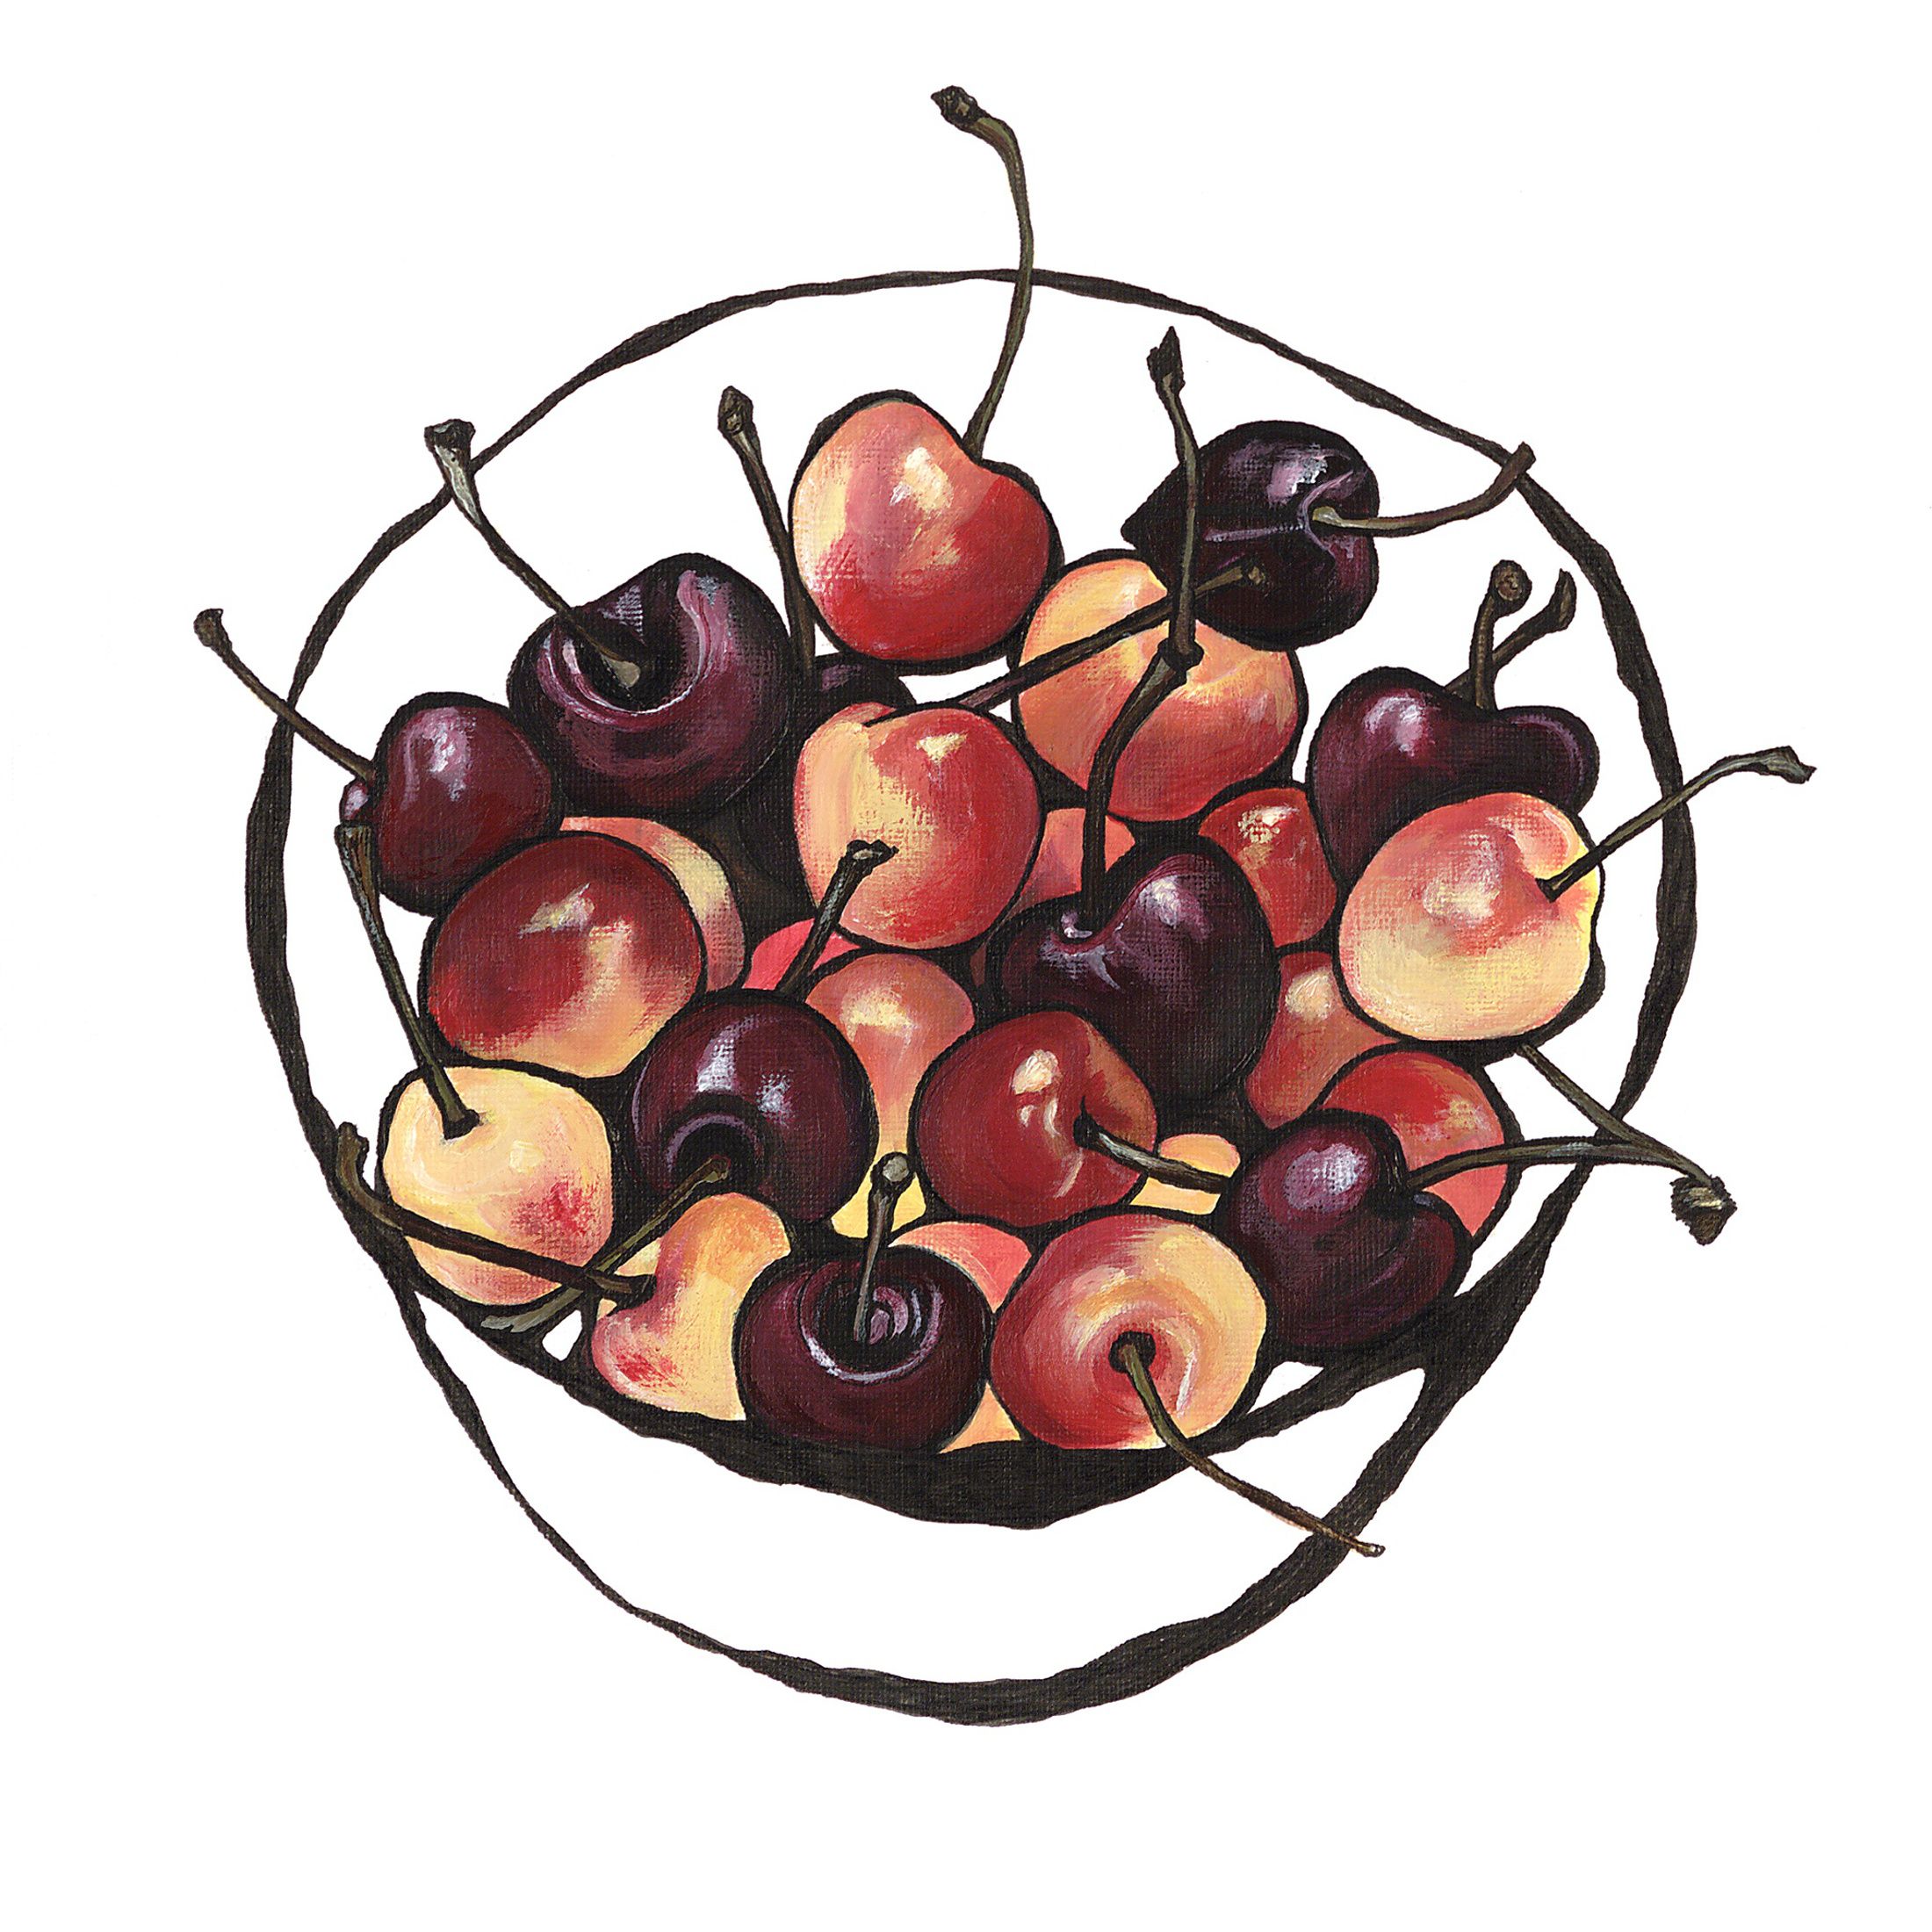 Cherries by Lucy Routh